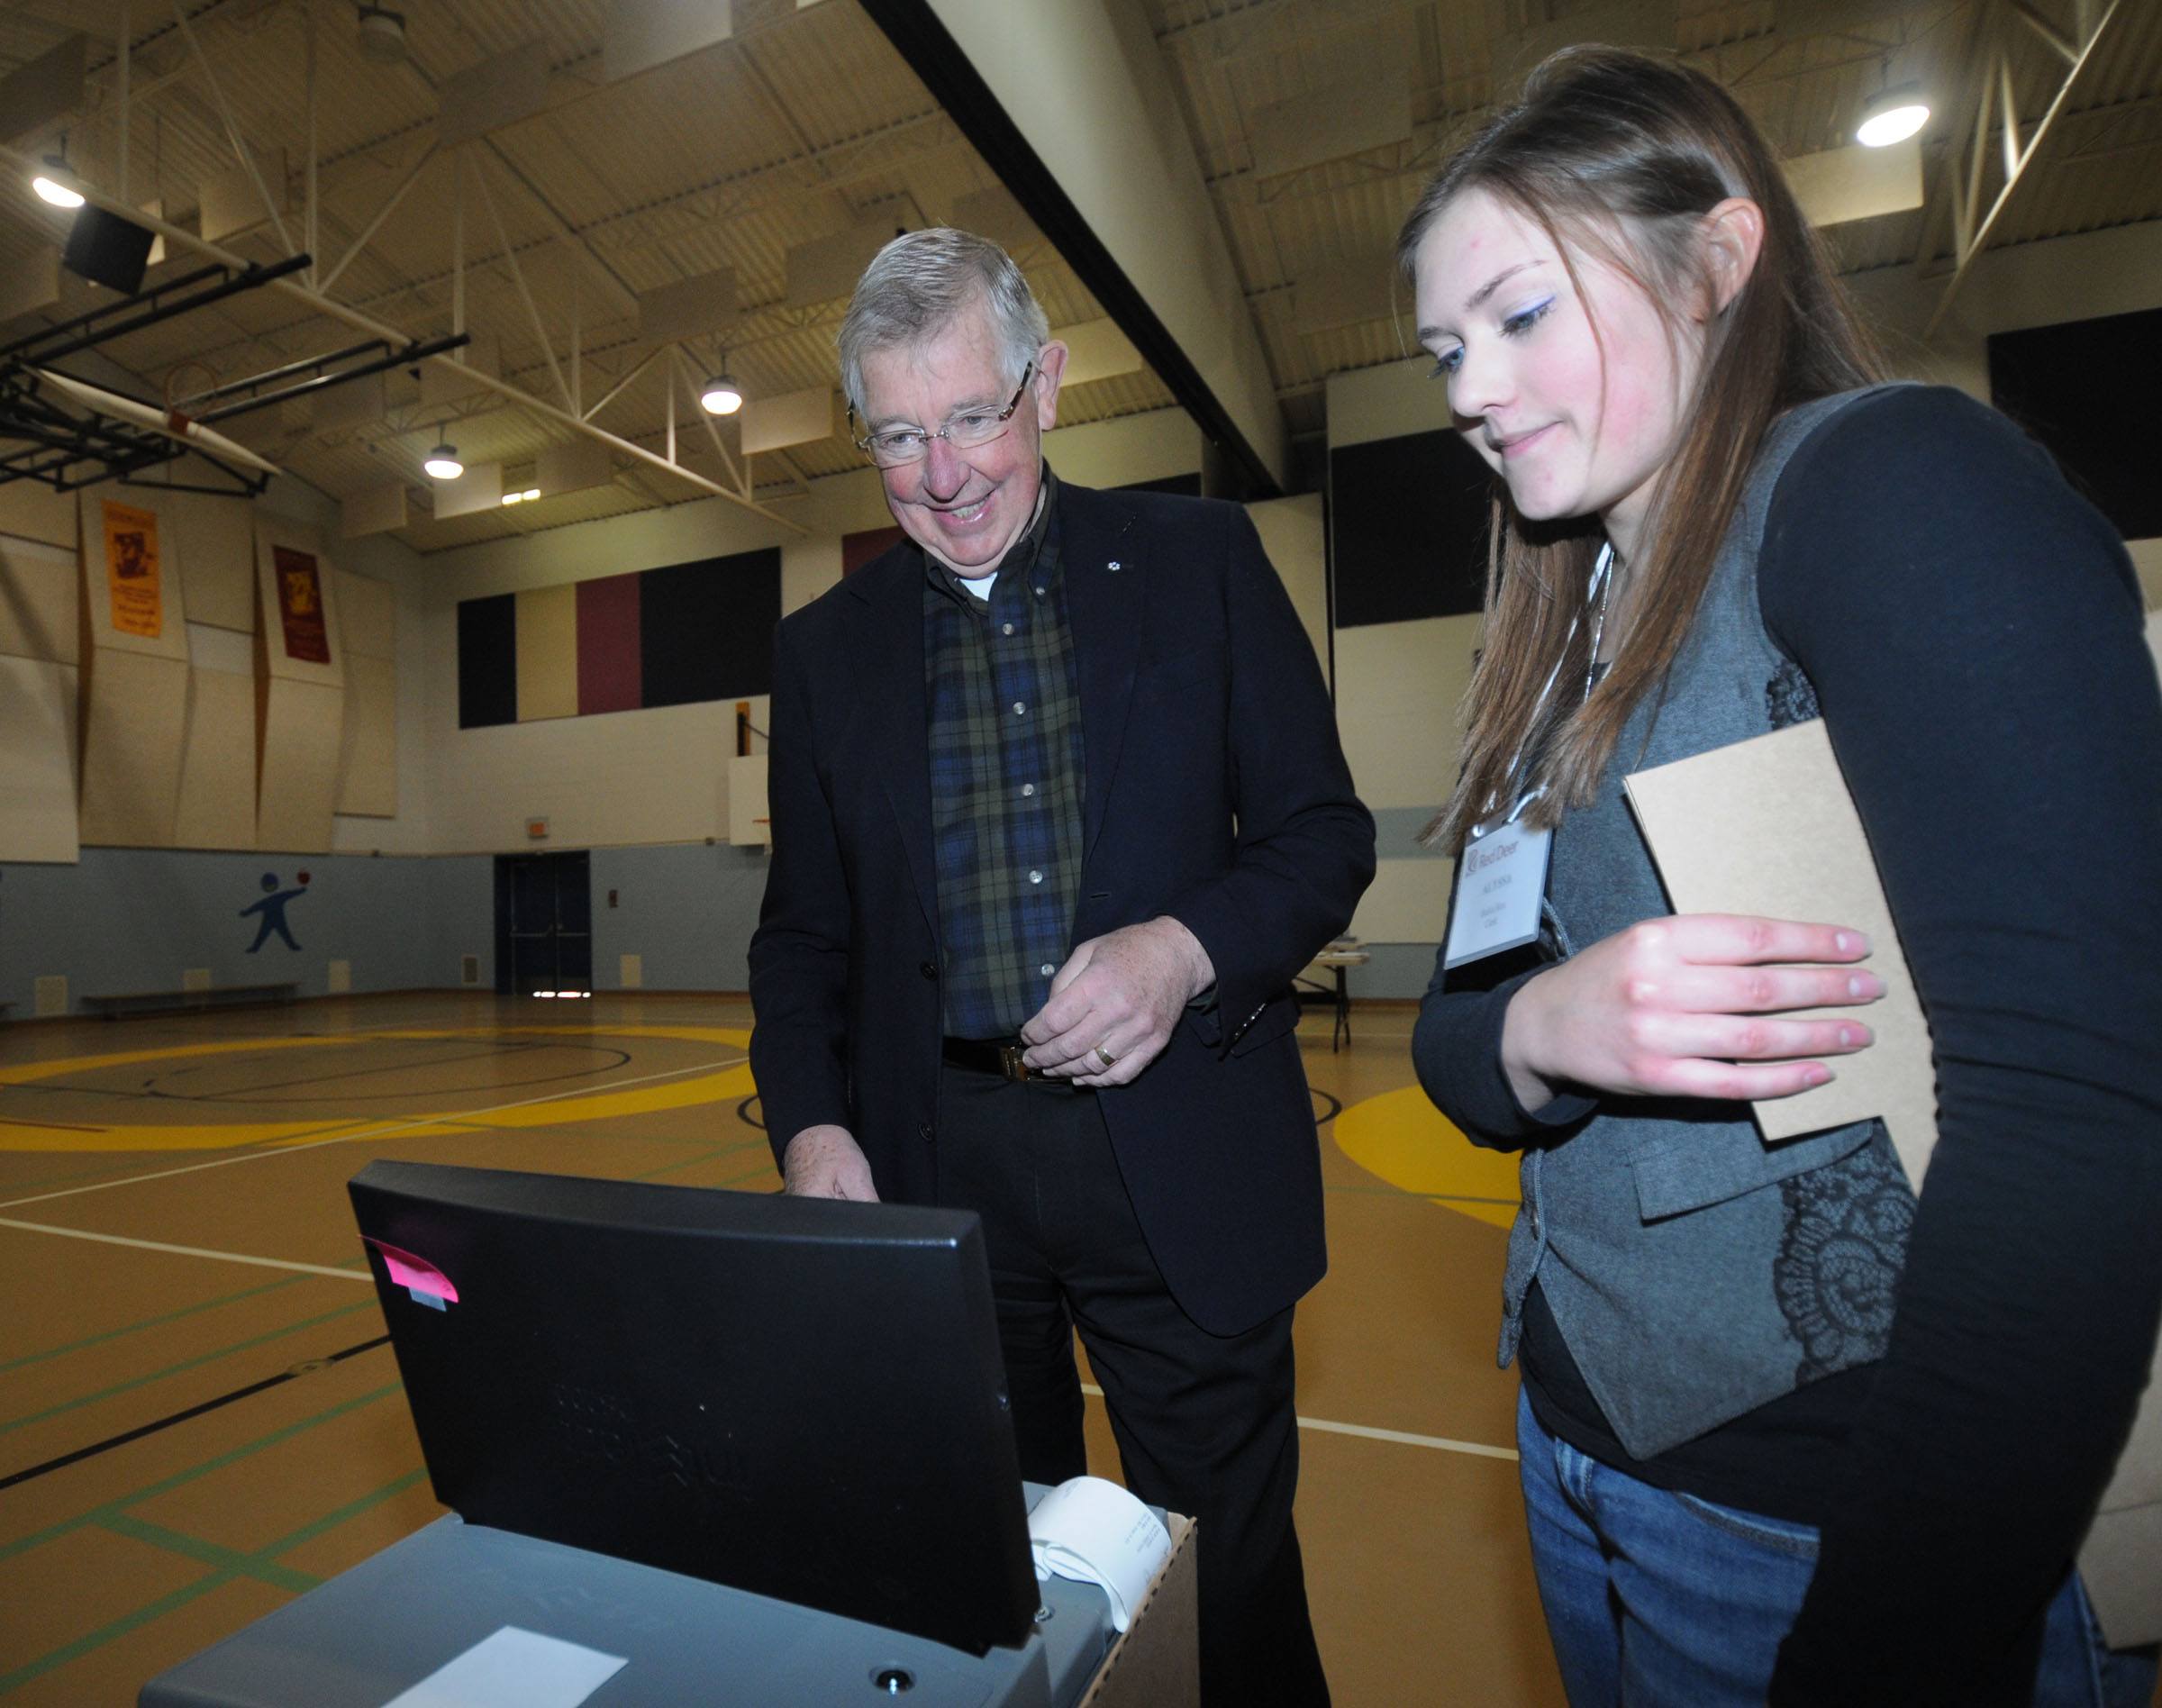 VOTING BEGINS- Mayor Morris Flewwelling waits for his vote to be fed into the ballot counter by Alyssa Stenvig early Monday morning at Mountain View School in Red Deer. Voting ends at 8 p.m.